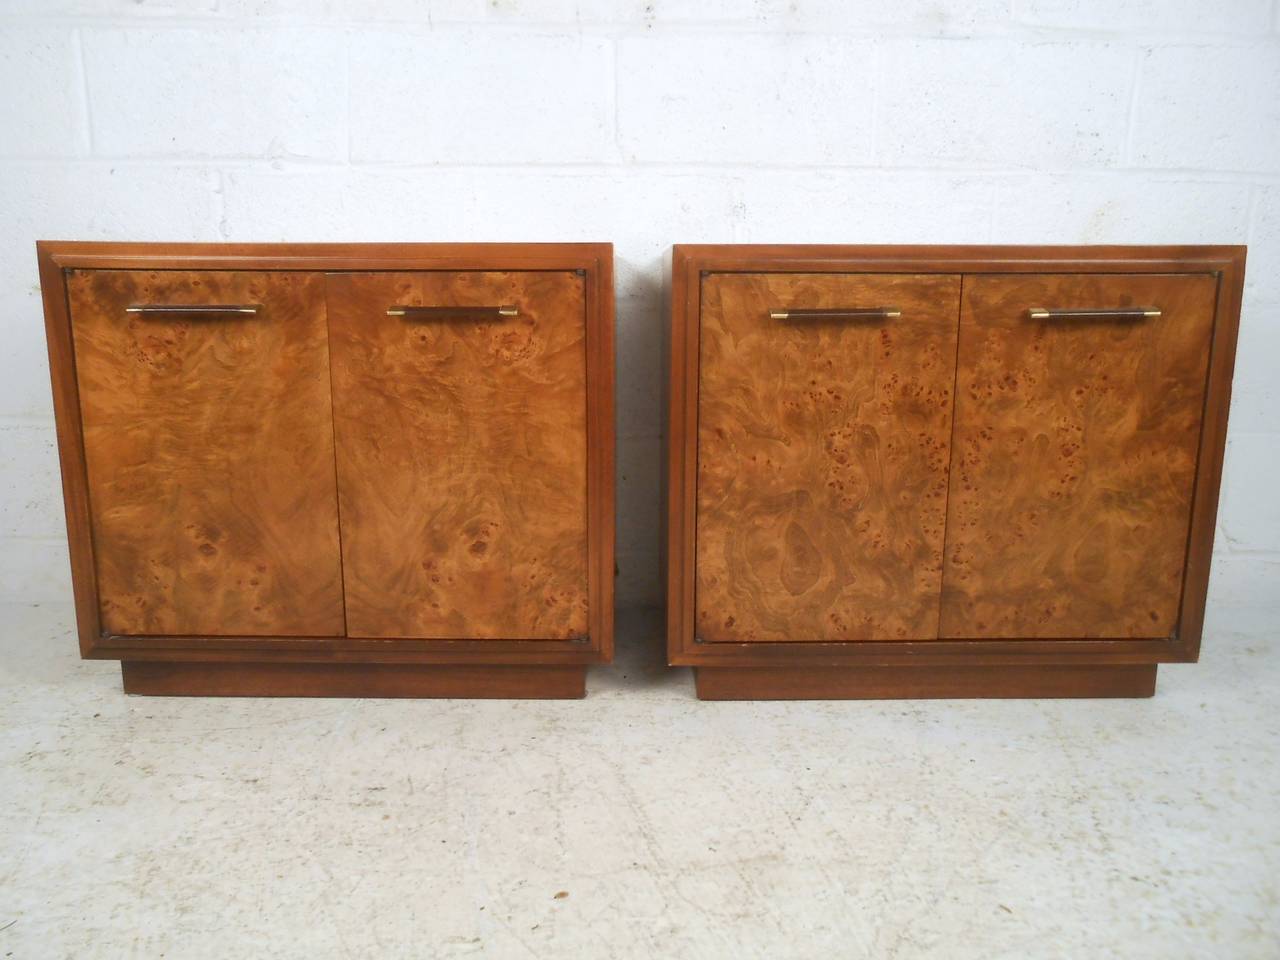 This matching pair of vintage nightstands features a lovely burl wood veneer, leather and brass door pulls, and plenty of cabinet storage for any interior. Matching highboy and dresser available, please confirm item location (NY or NJ).